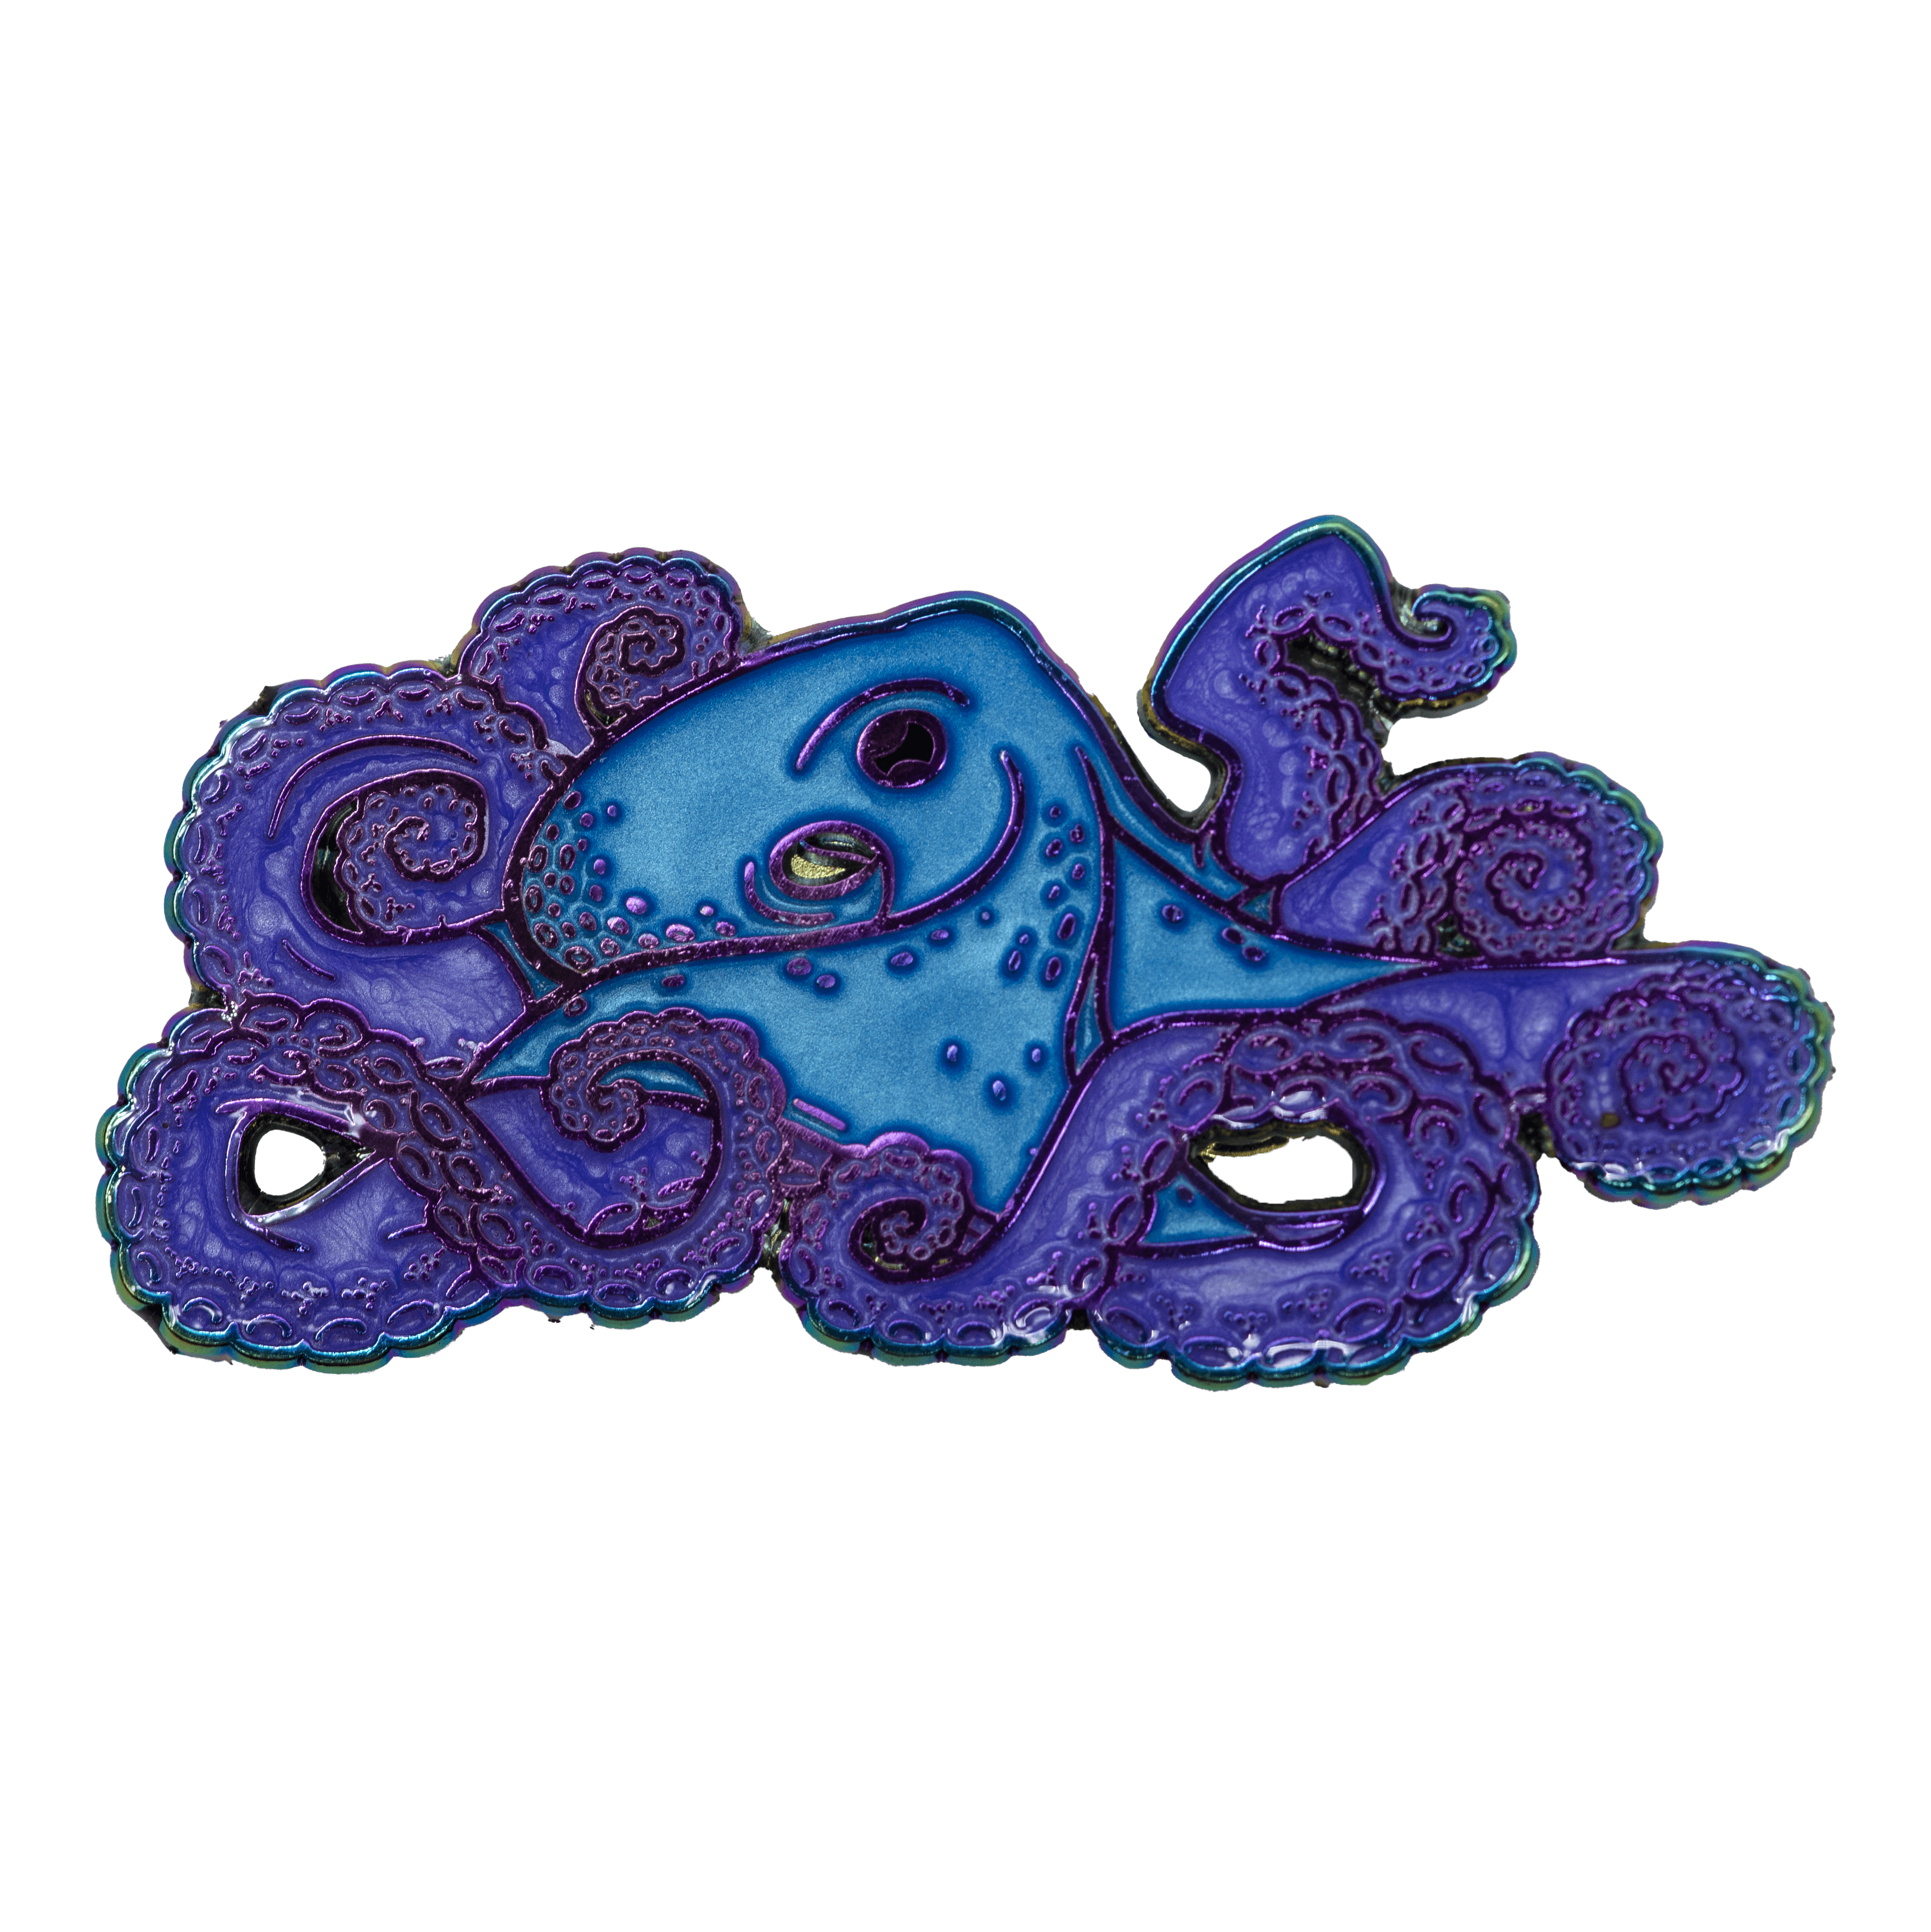 A large octopus enamel pin, featuring an anodized rainbow metal outline and shimmering, pearlescent blue and purple fill.